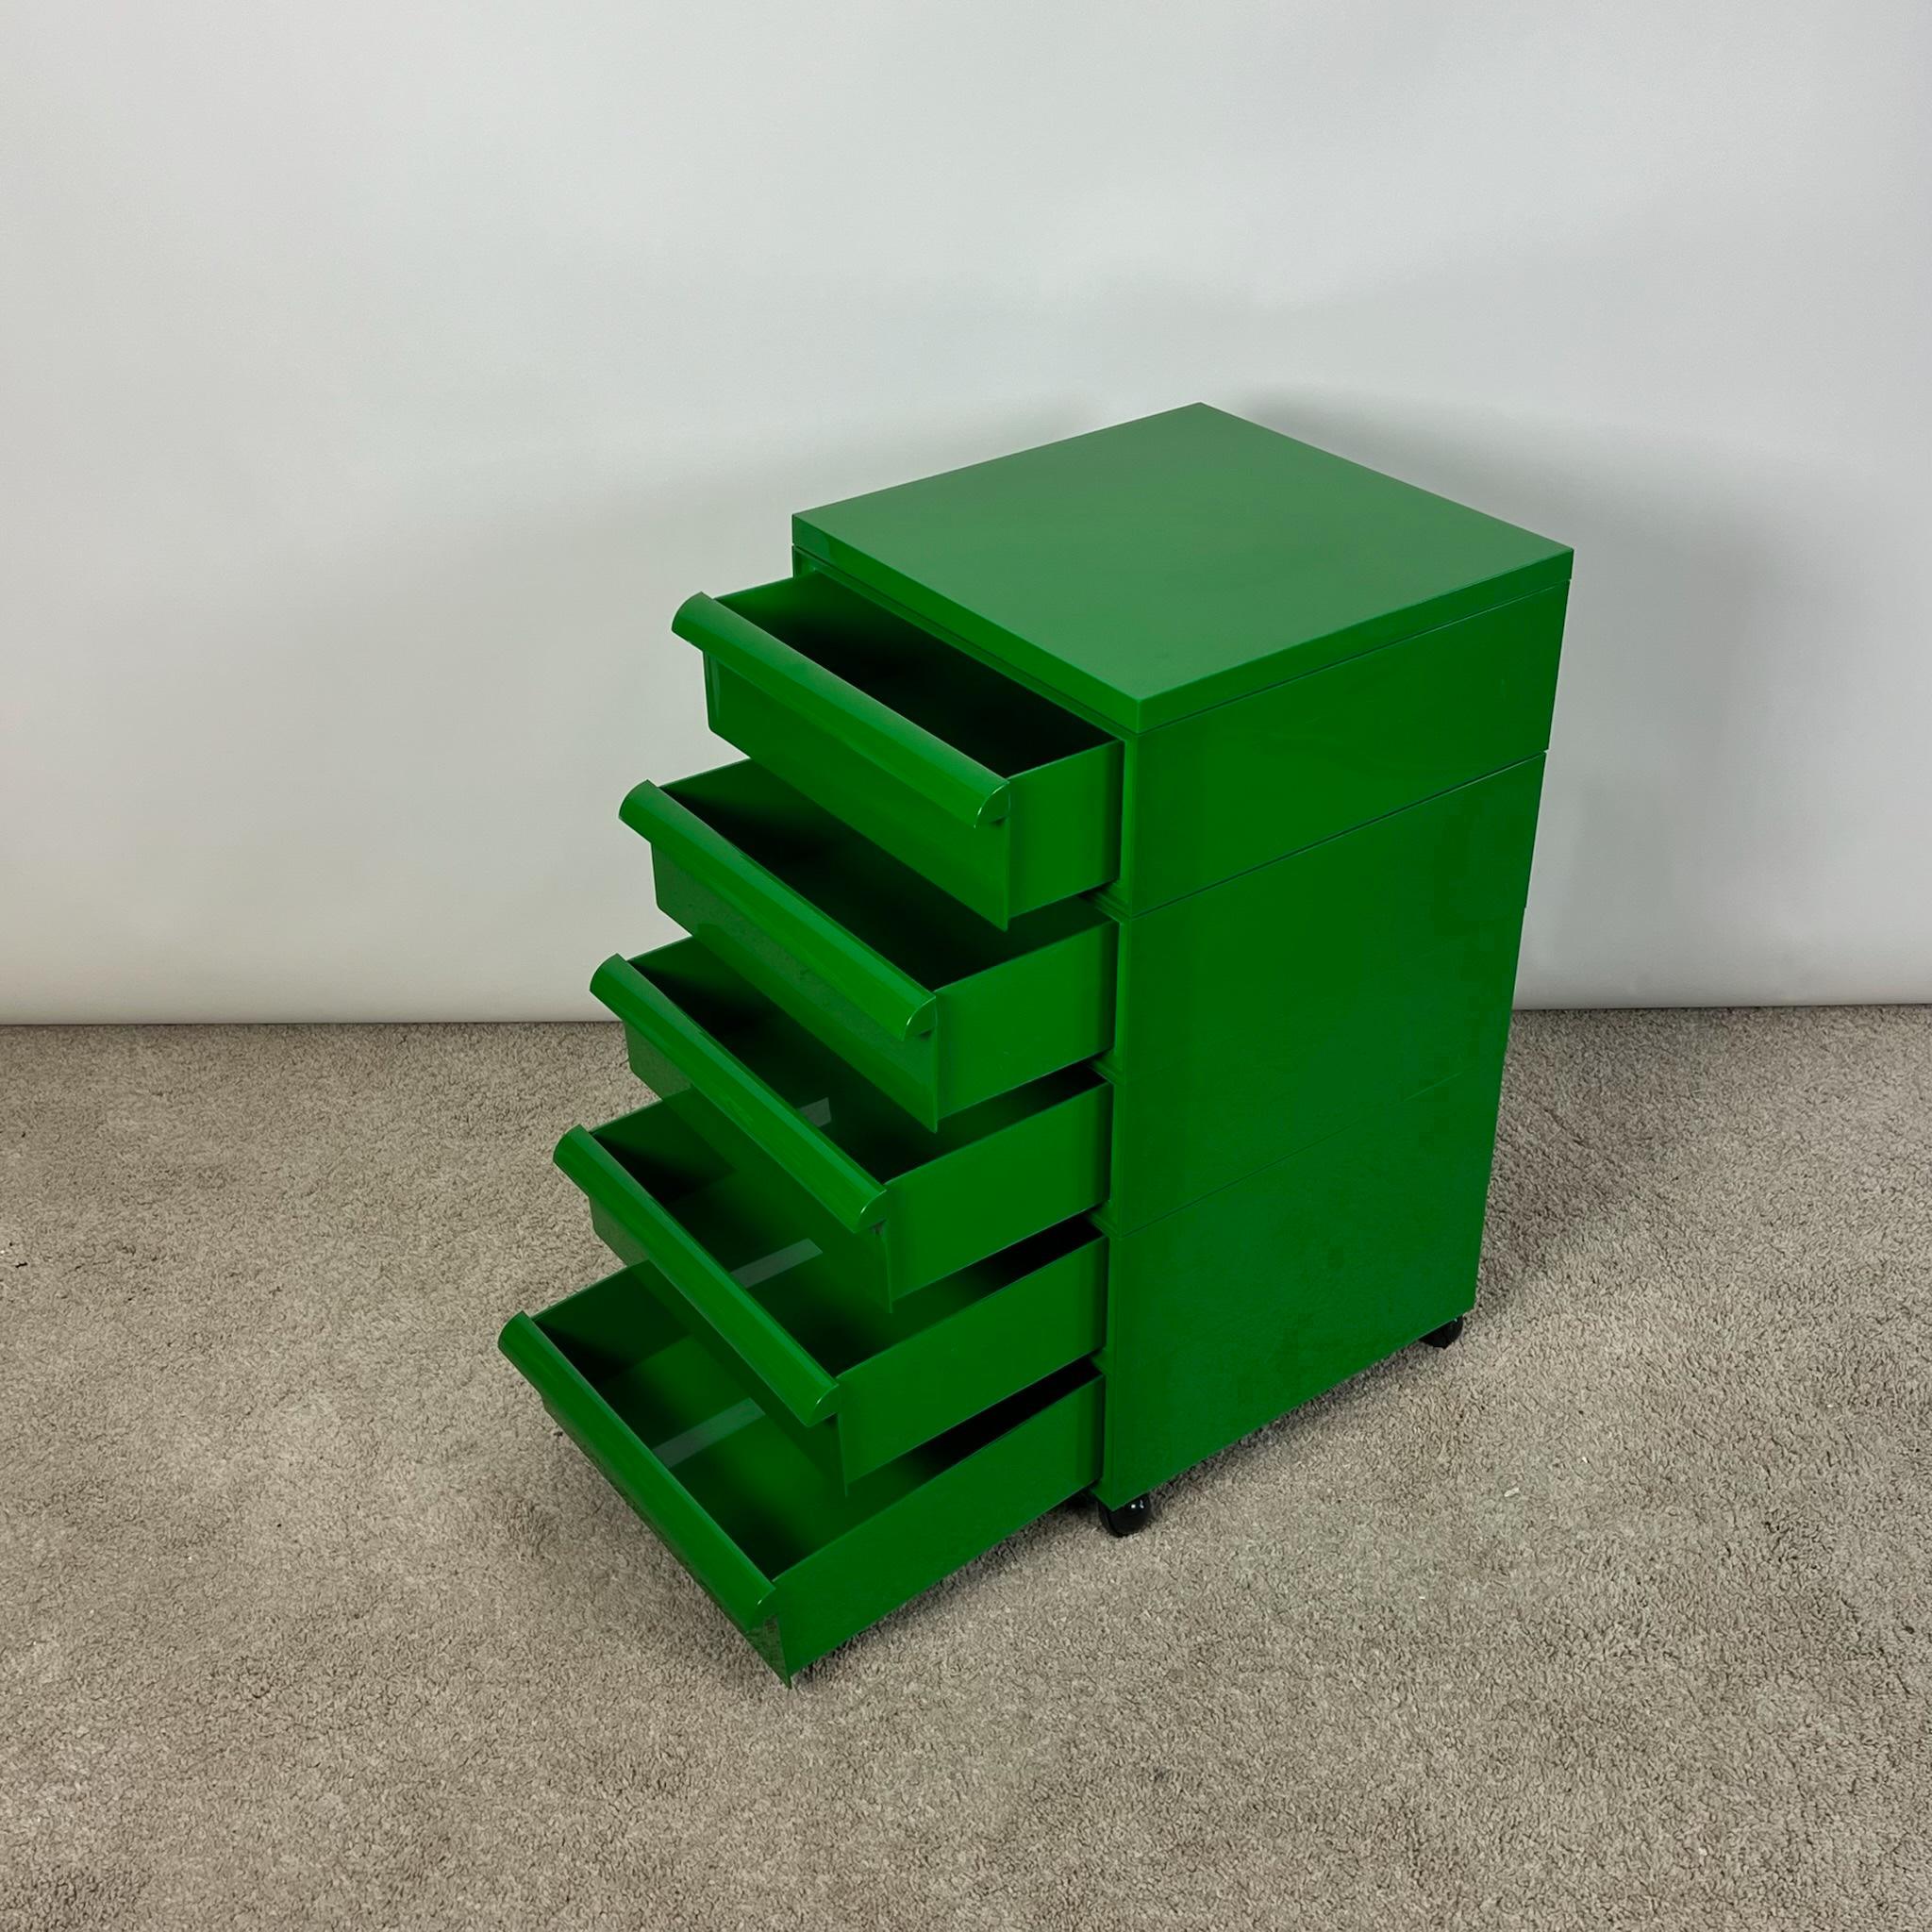 Beautiful and rare green plastic chest of drawers designed by Simon Fussell and produced by Kartell. 

This modular green plastic chest of drawers on wheels has a simple but ingenious design. Each drawers is a single unit that can be combined with